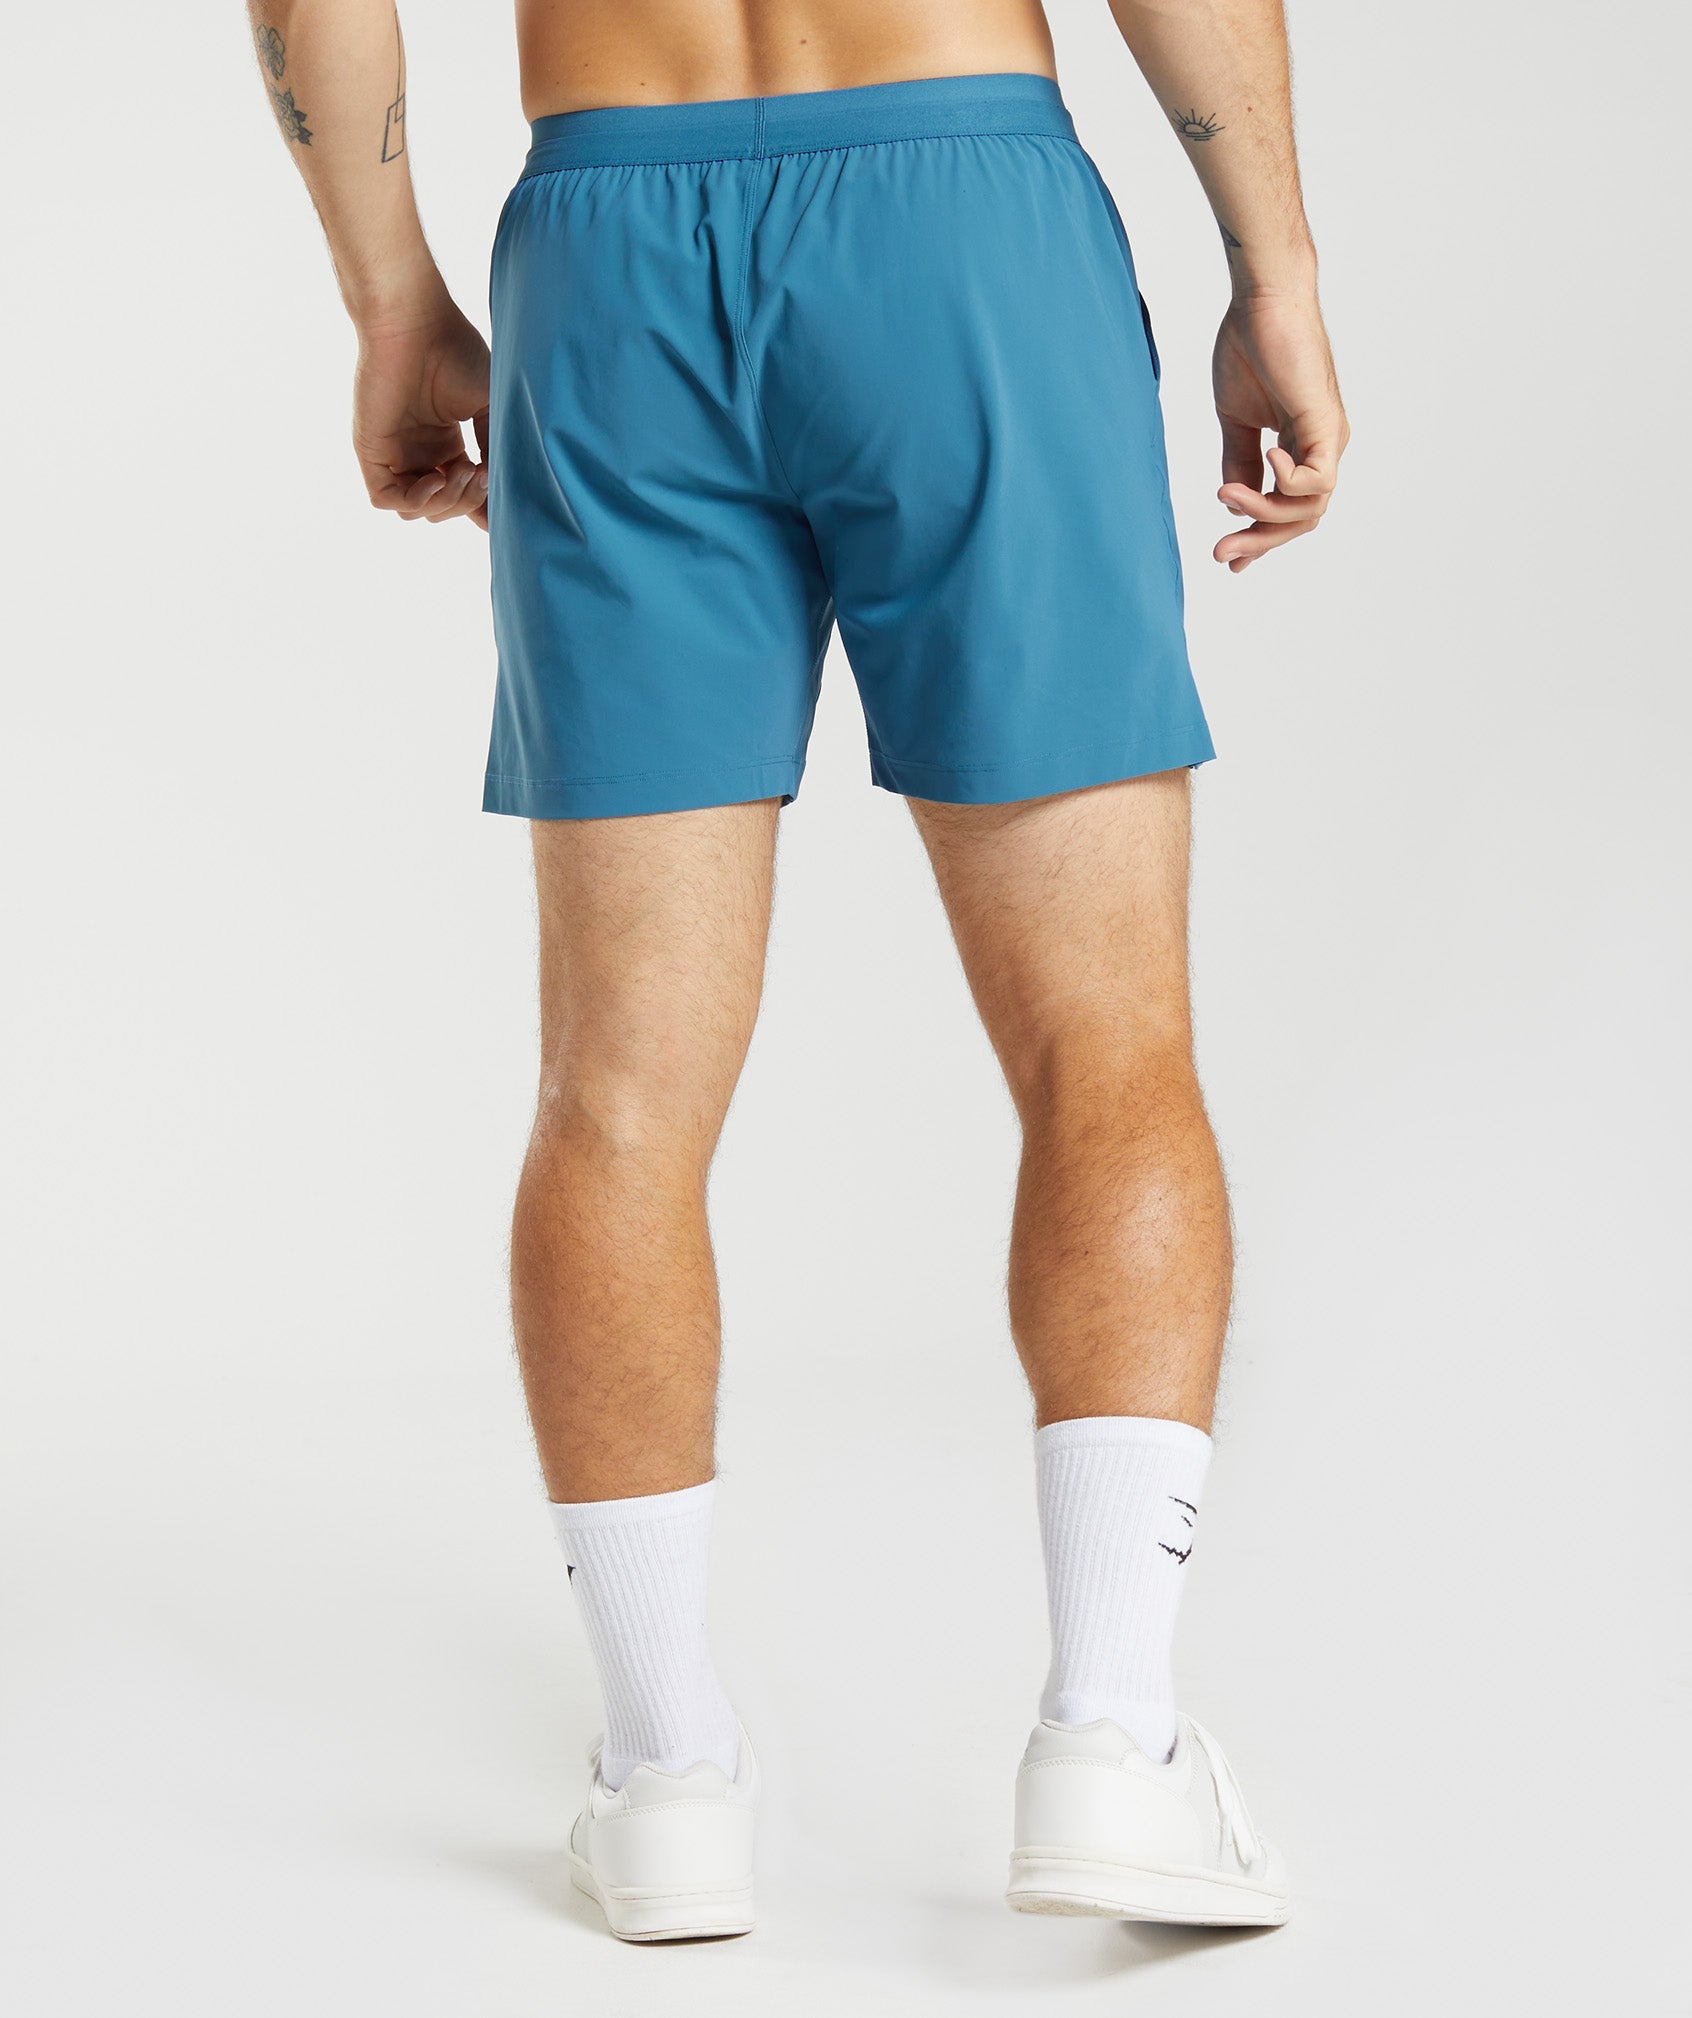 Studio Shorts in Lakeside Blue - view 2